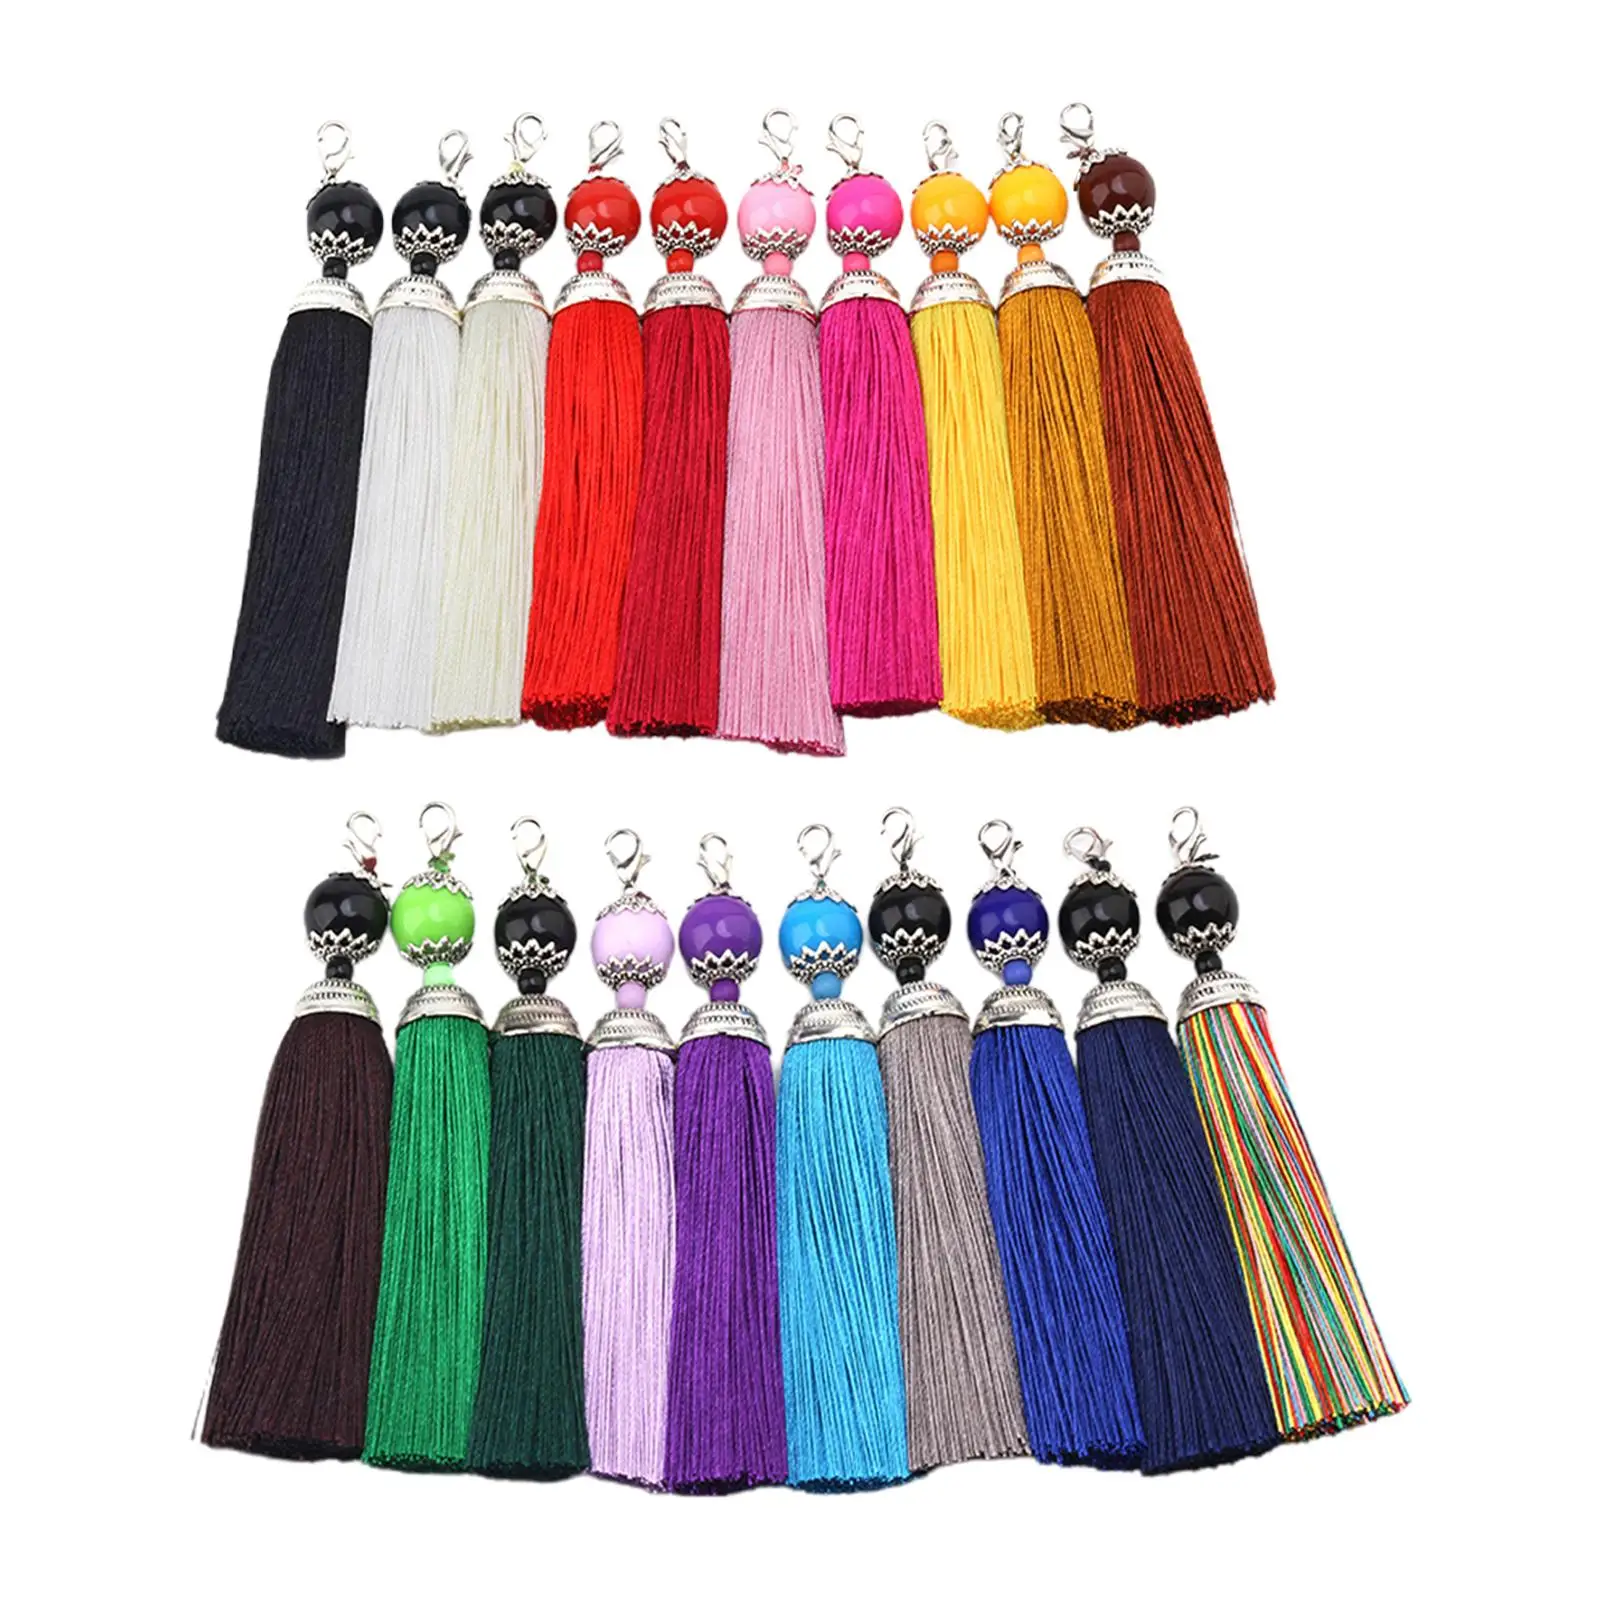 10 Pieces Tassels for Jewelry Making, Keychain Tassel Charms for Keychain DIY Craft